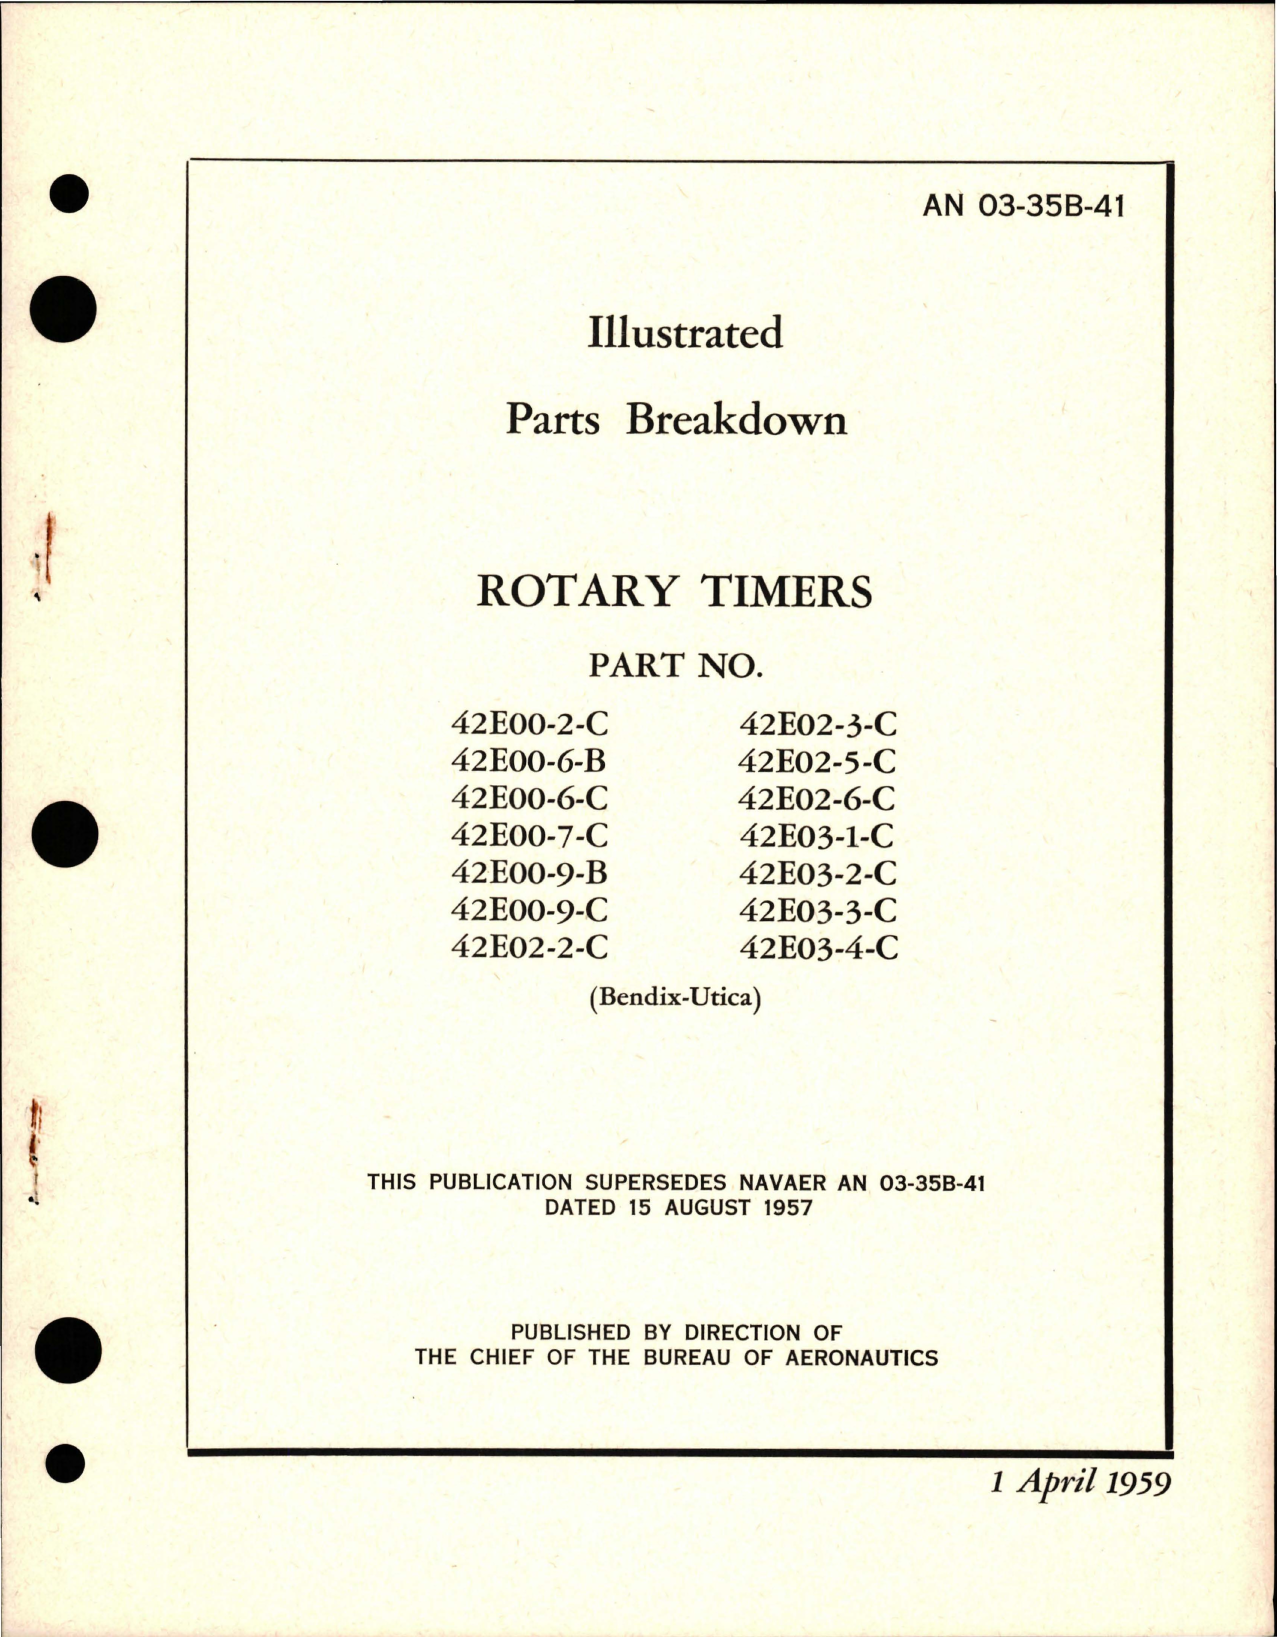 Sample page 1 from AirCorps Library document: Illustrated Parts Breakdown for Rotary Timers